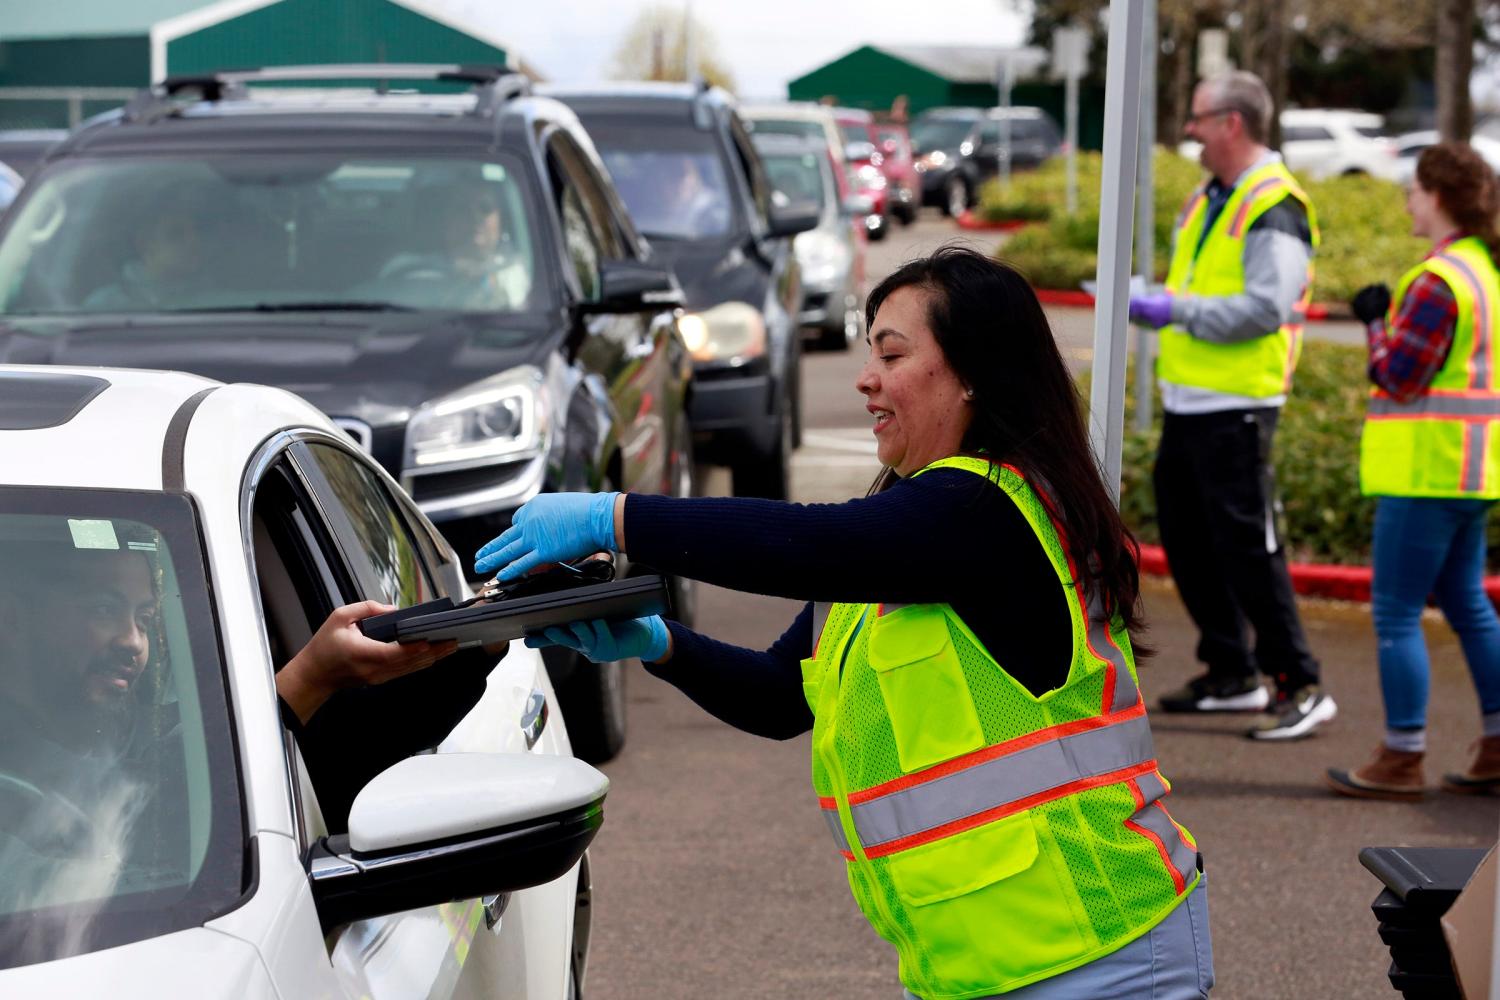 Araceli Avilez hands out a laptop in the McKay High School parking lot in Salem, Oregon, on Thursday, April 2, 2020. Salem-Keizer Public Schools passed out tens of thousands of Chromebooks to students and parents Thursday so students could continue learning while schools remain closed to slow the spread of COVID-19.Laptop Photo 2